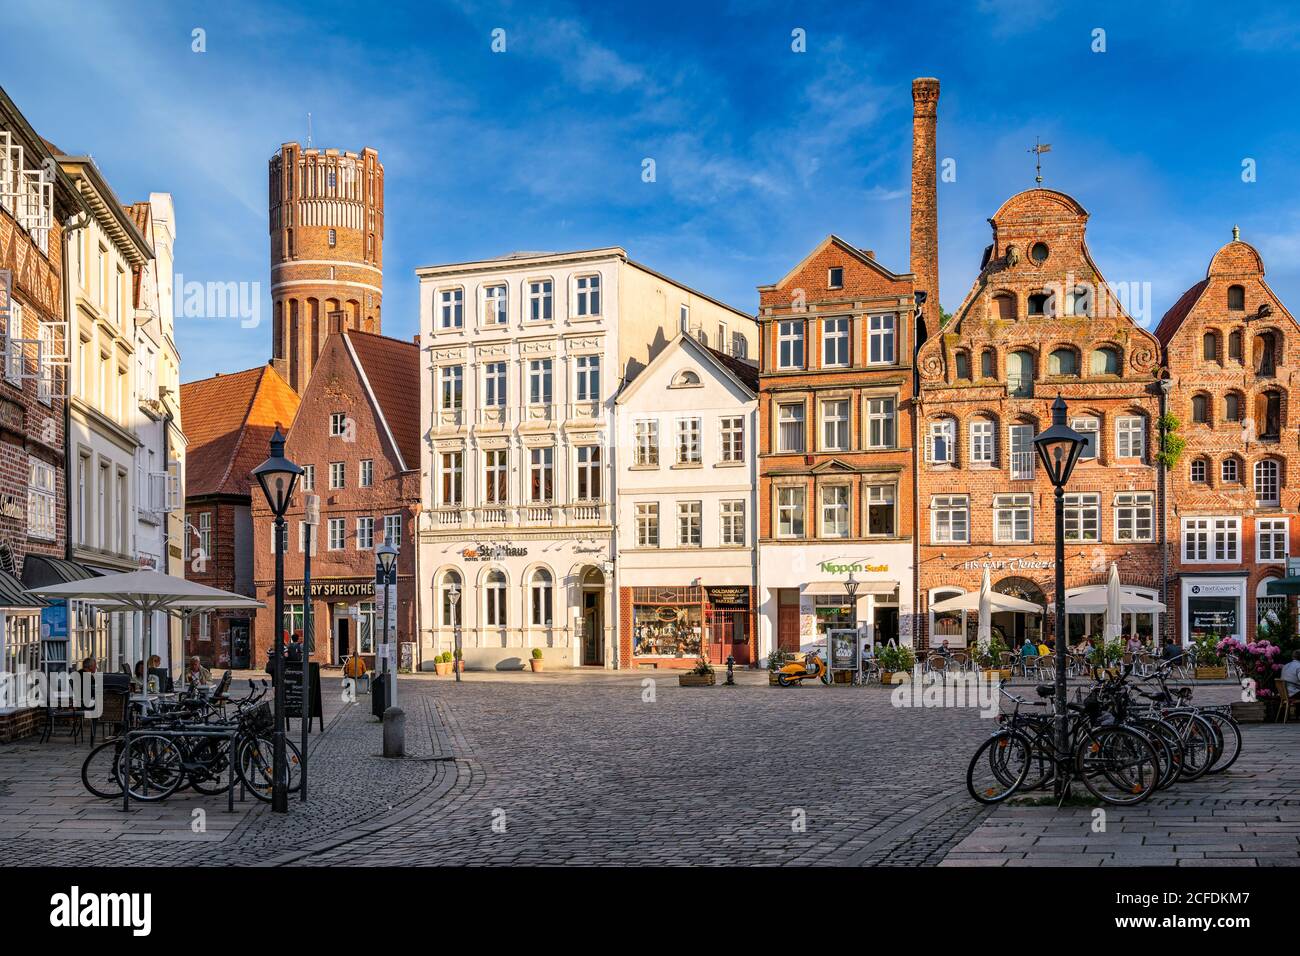 Am Sande square with historic buildings in Lüneburg, Germany Stock Photo